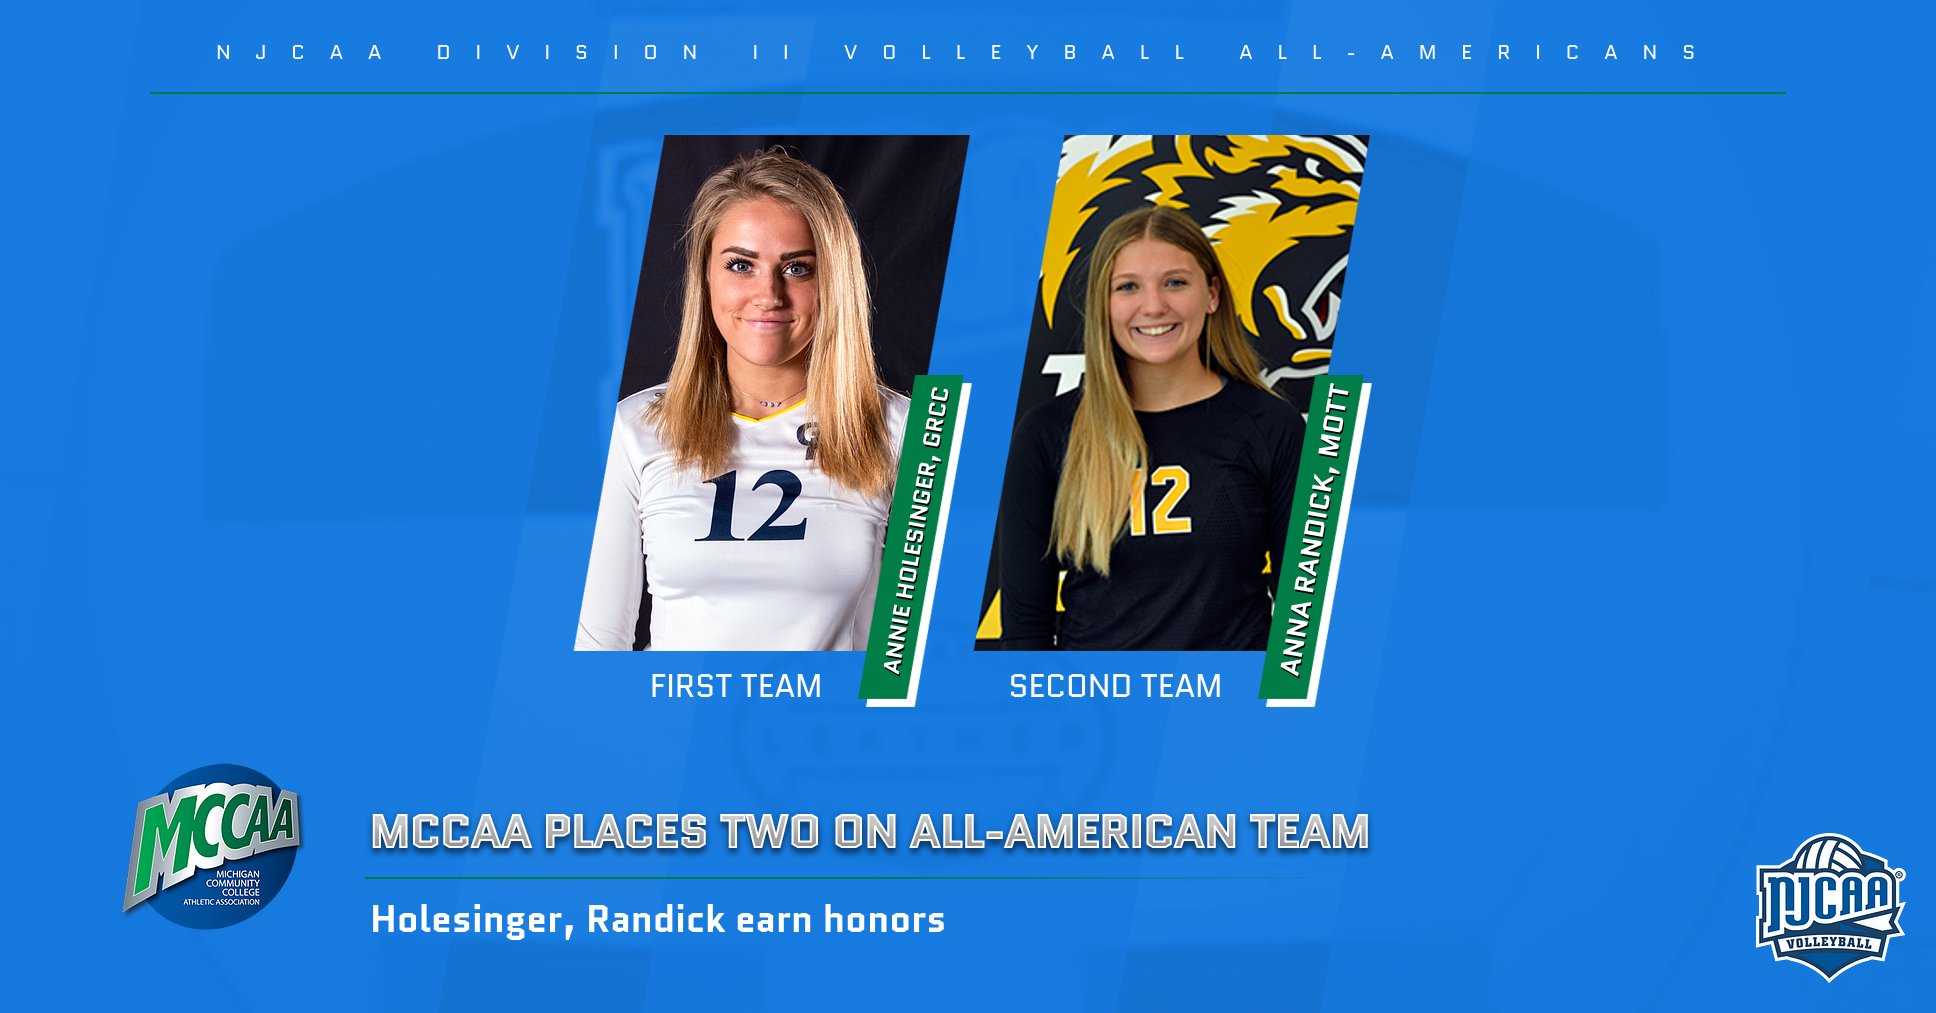 NJCAA Division II Volleyball All-Americans